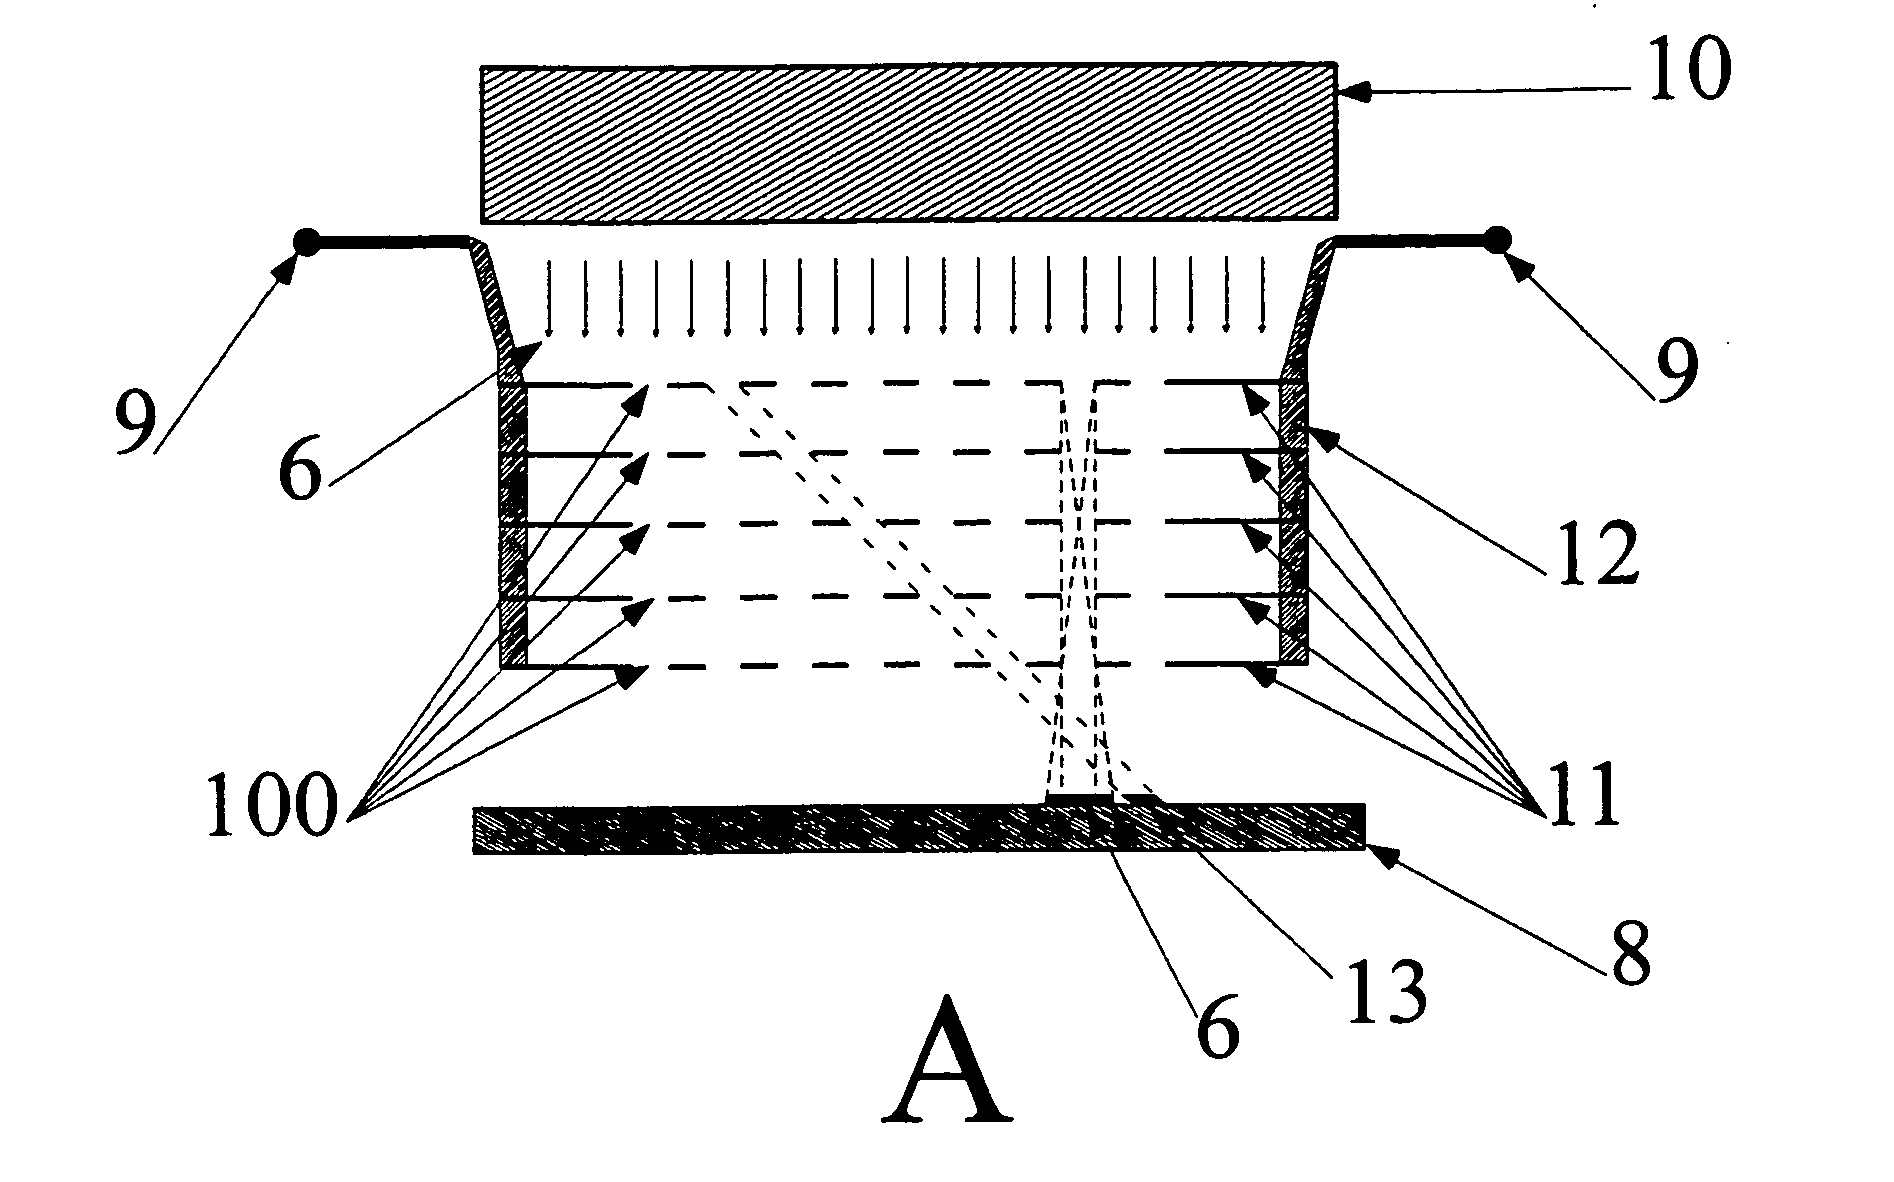 Patterned thin-film deposition using collimating heated masked assembly